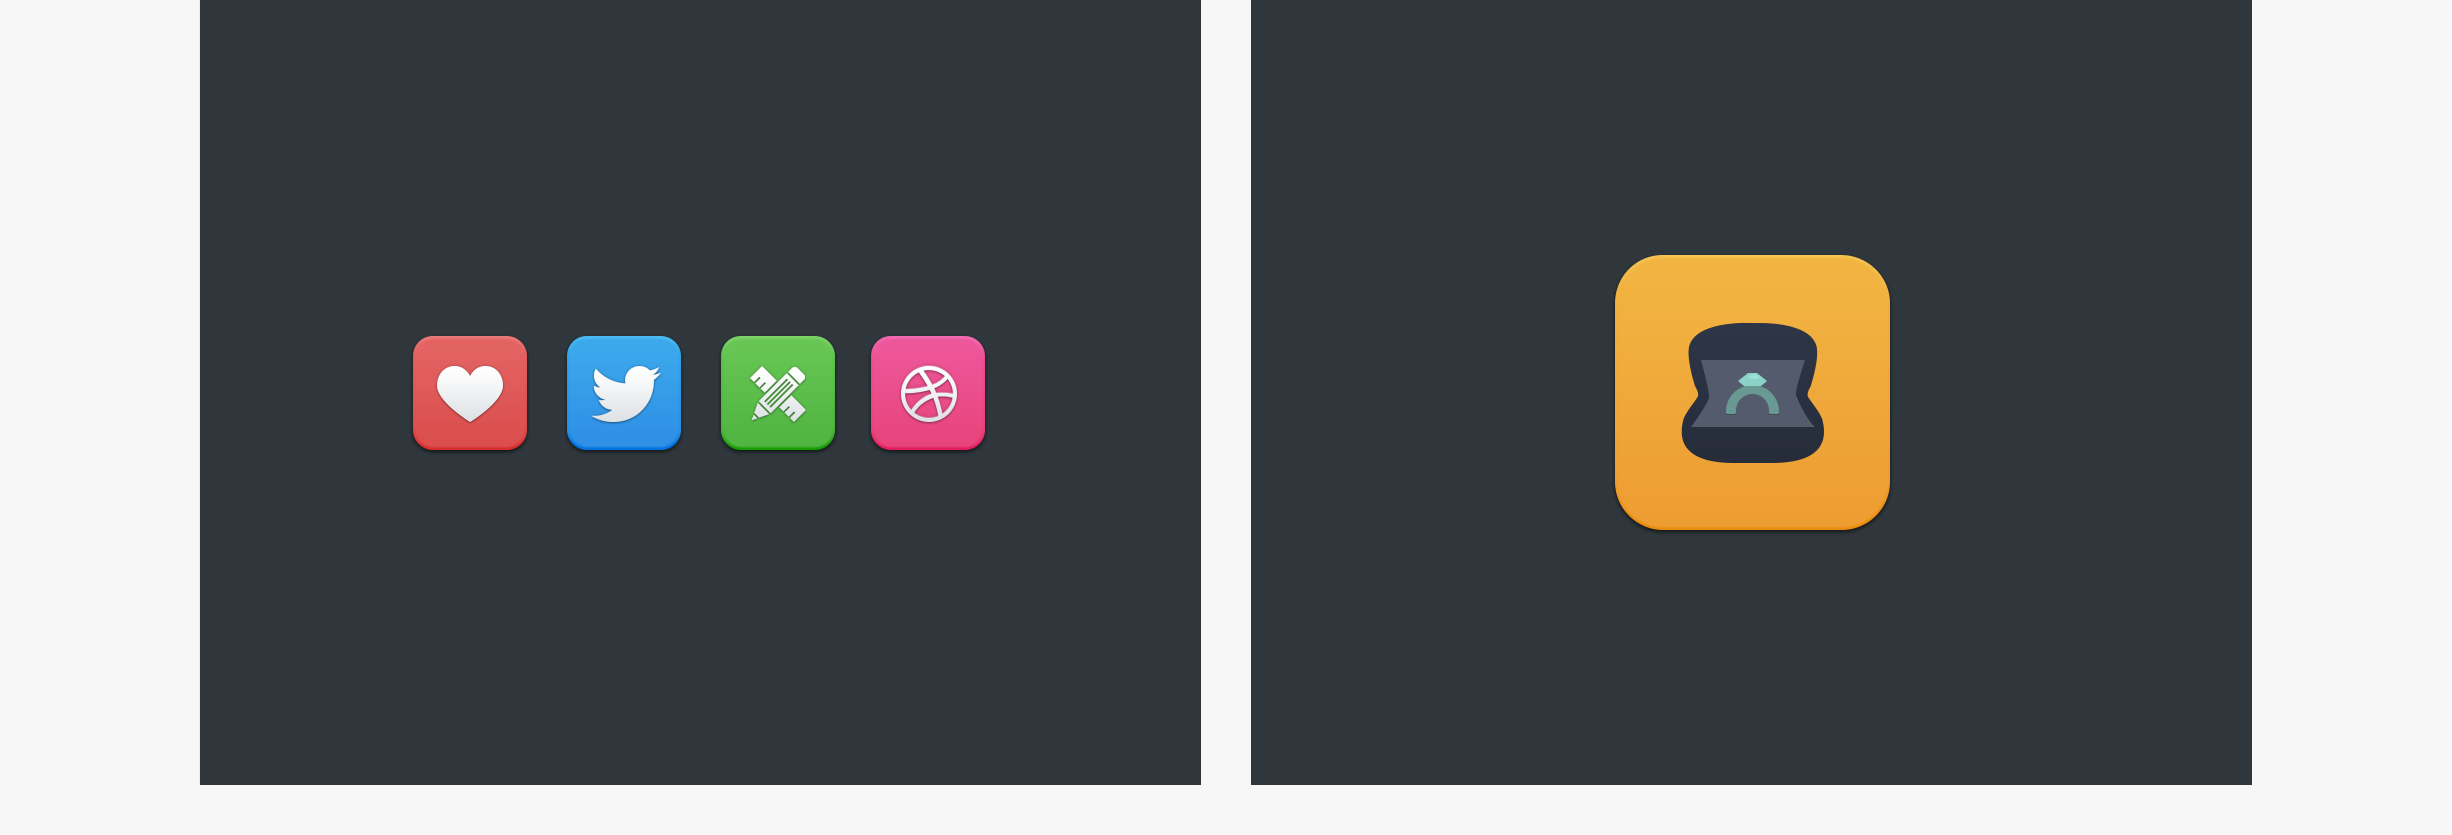 Icons - twitter - heart - dribbble - ring